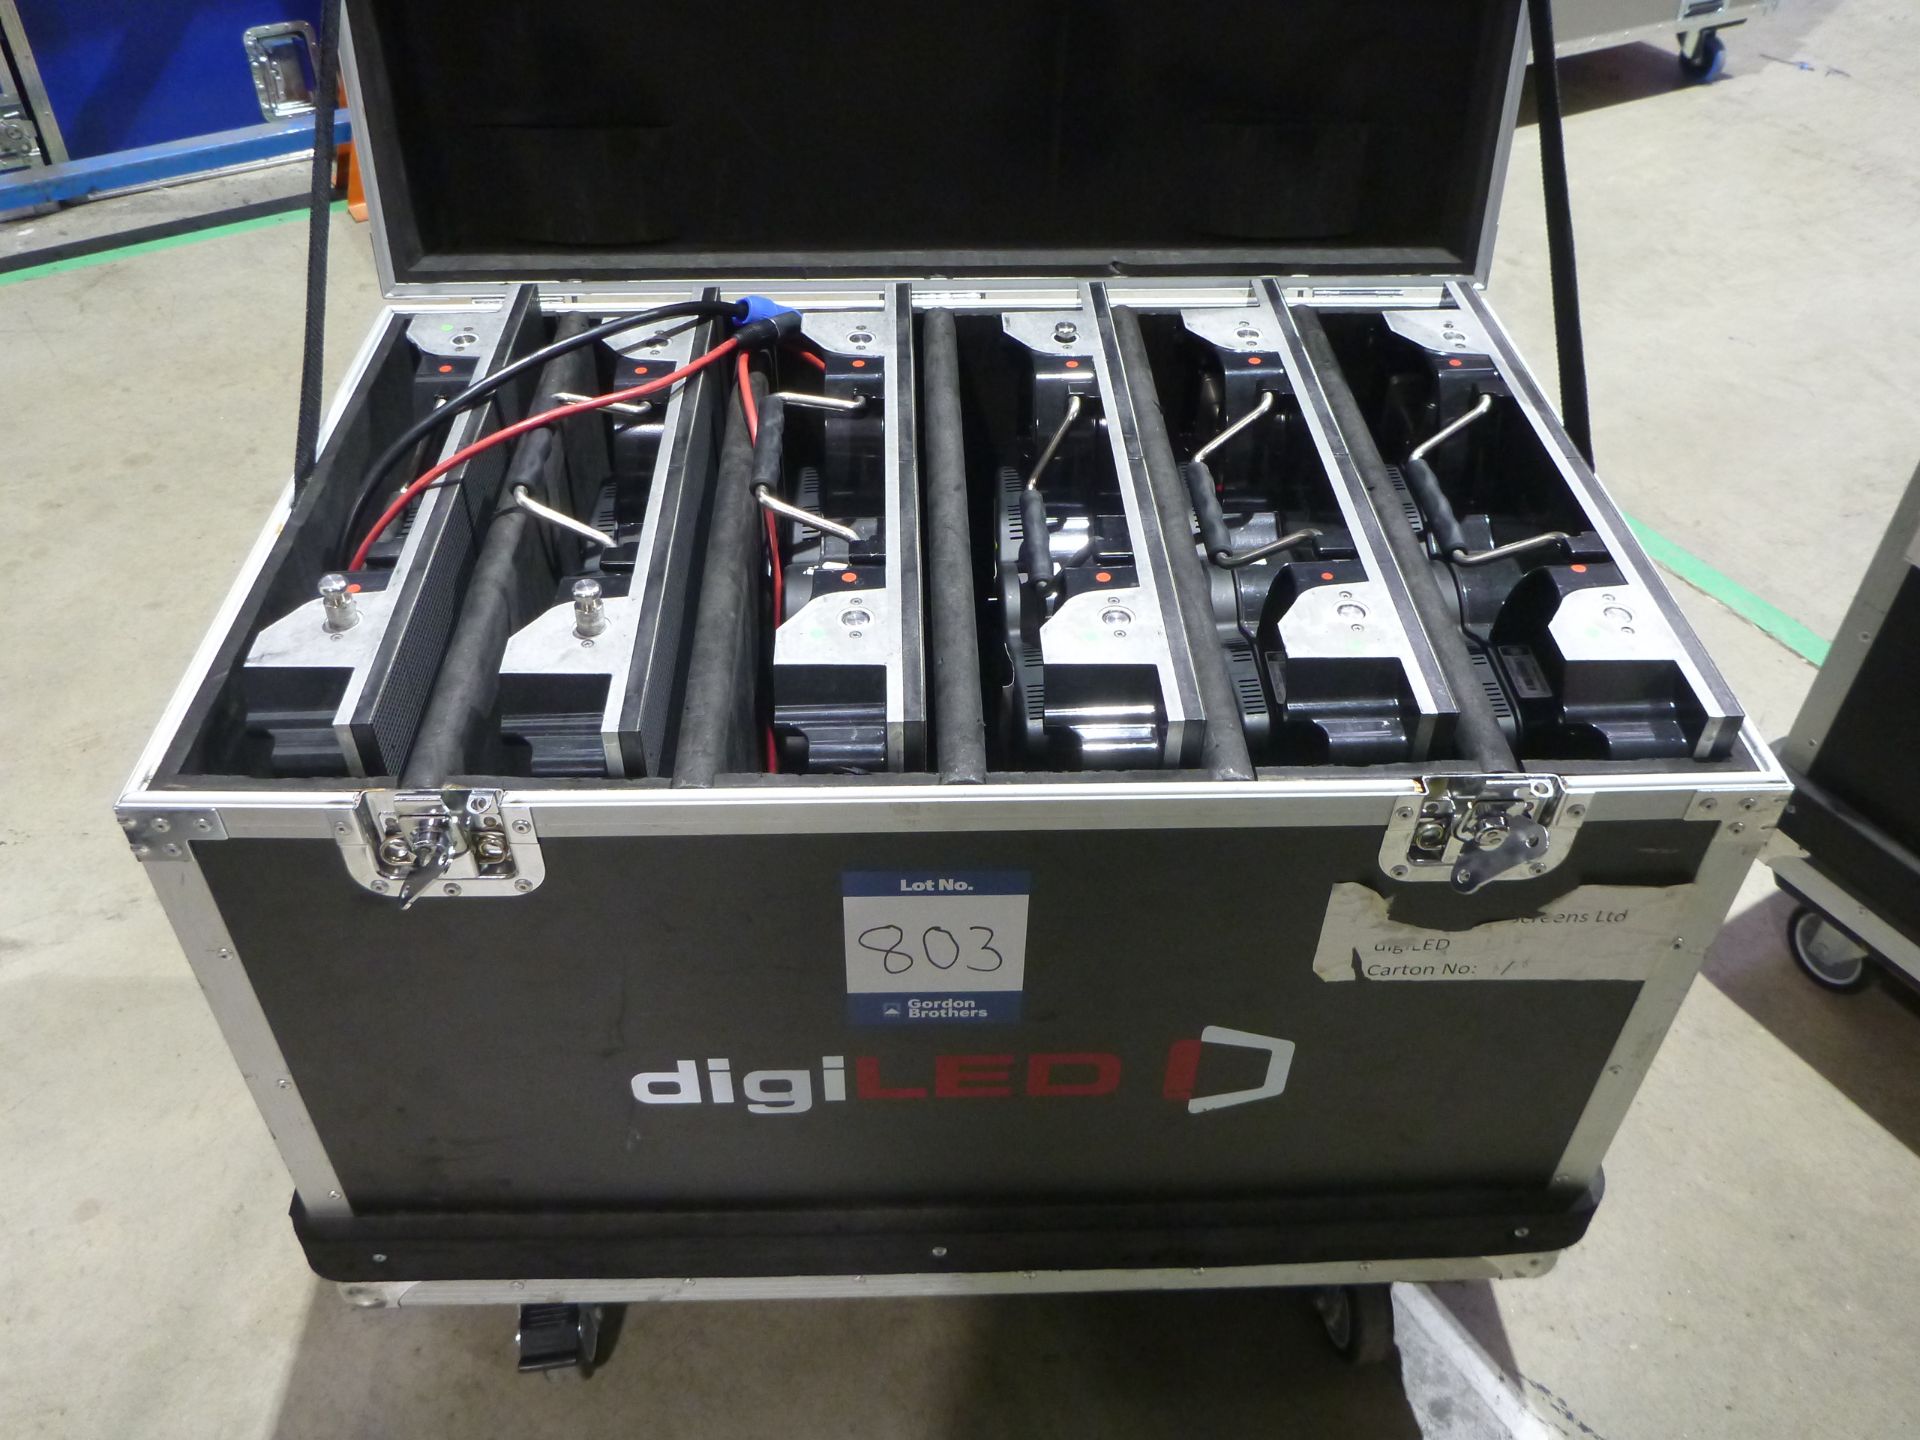 DigiLED HRi 3900 LED Modules (Red) Qty 6 off in flight case. Note tiles only no cables (Please